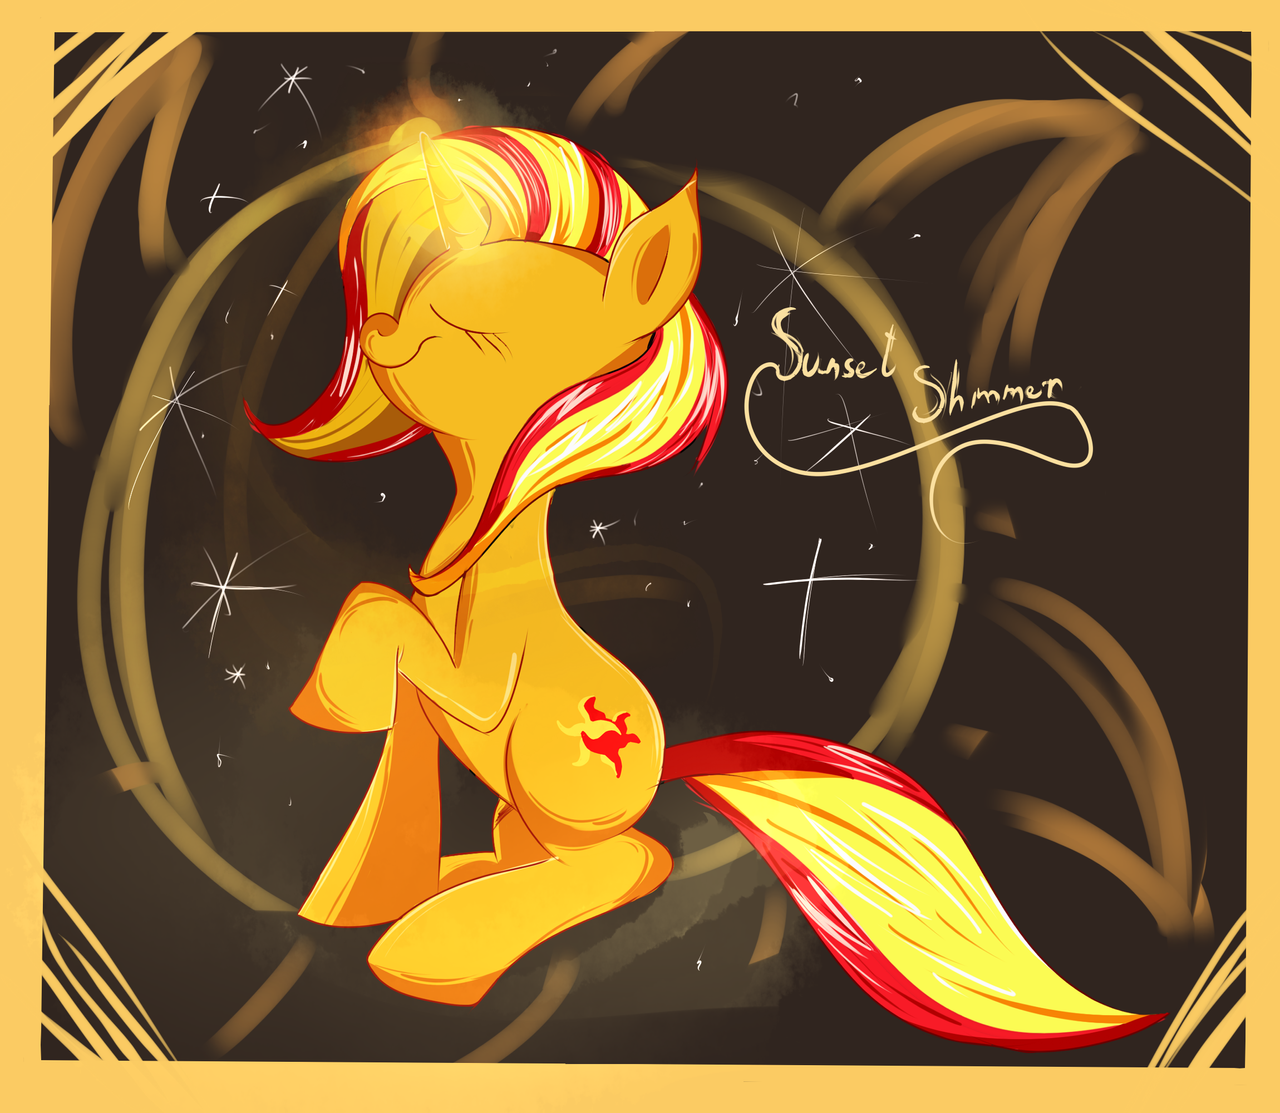 [Obrázek: sunset_shimmer_by_vanille913-d5xi27a.png]